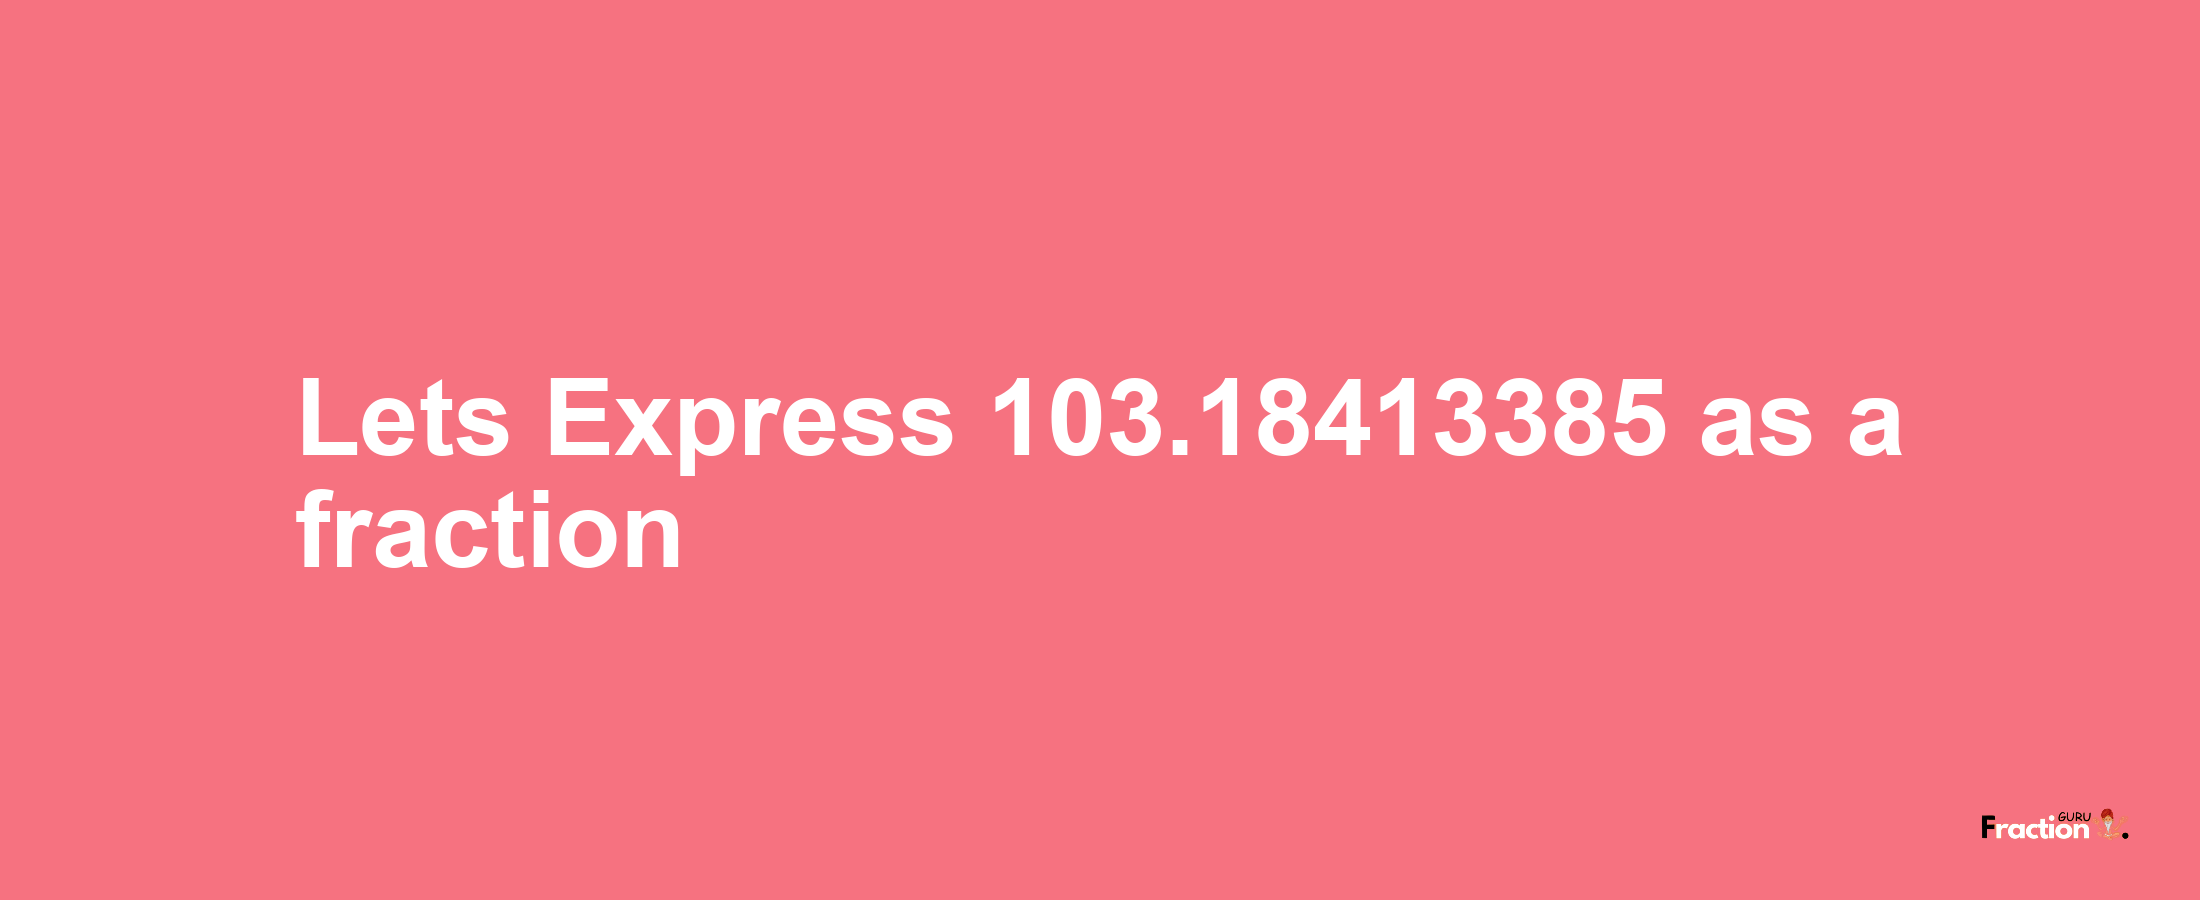 Lets Express 103.18413385 as afraction